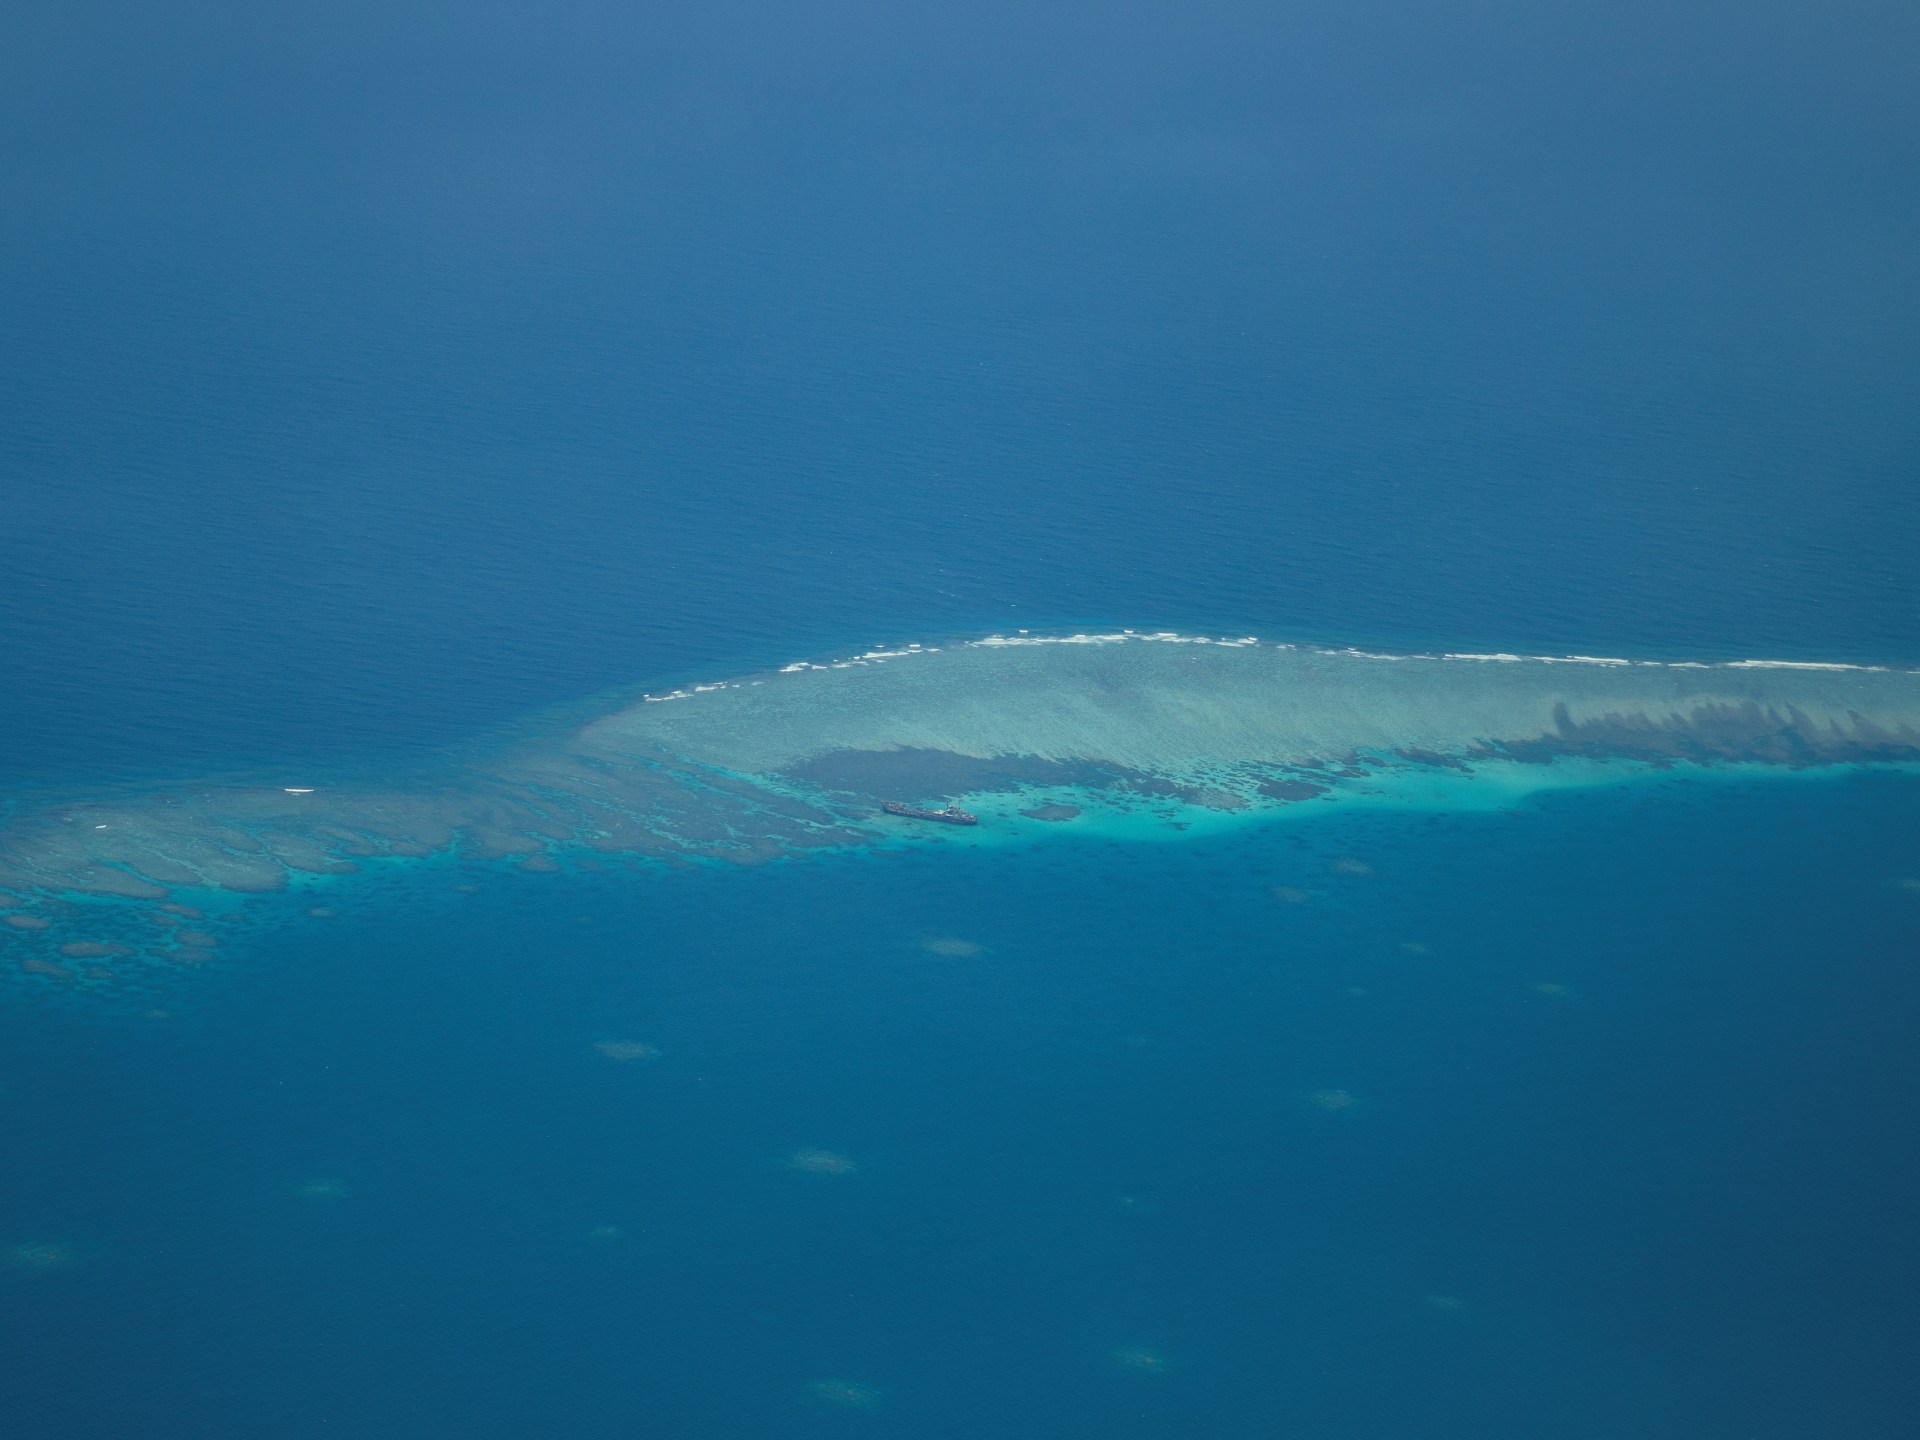 Beijing accuses US navy of ‘illegally’ entering South China Sea territory | South China Sea News #Beijing #accuses #navy #illegally #entering #South #China #Sea #territory #South #China #Sea #News